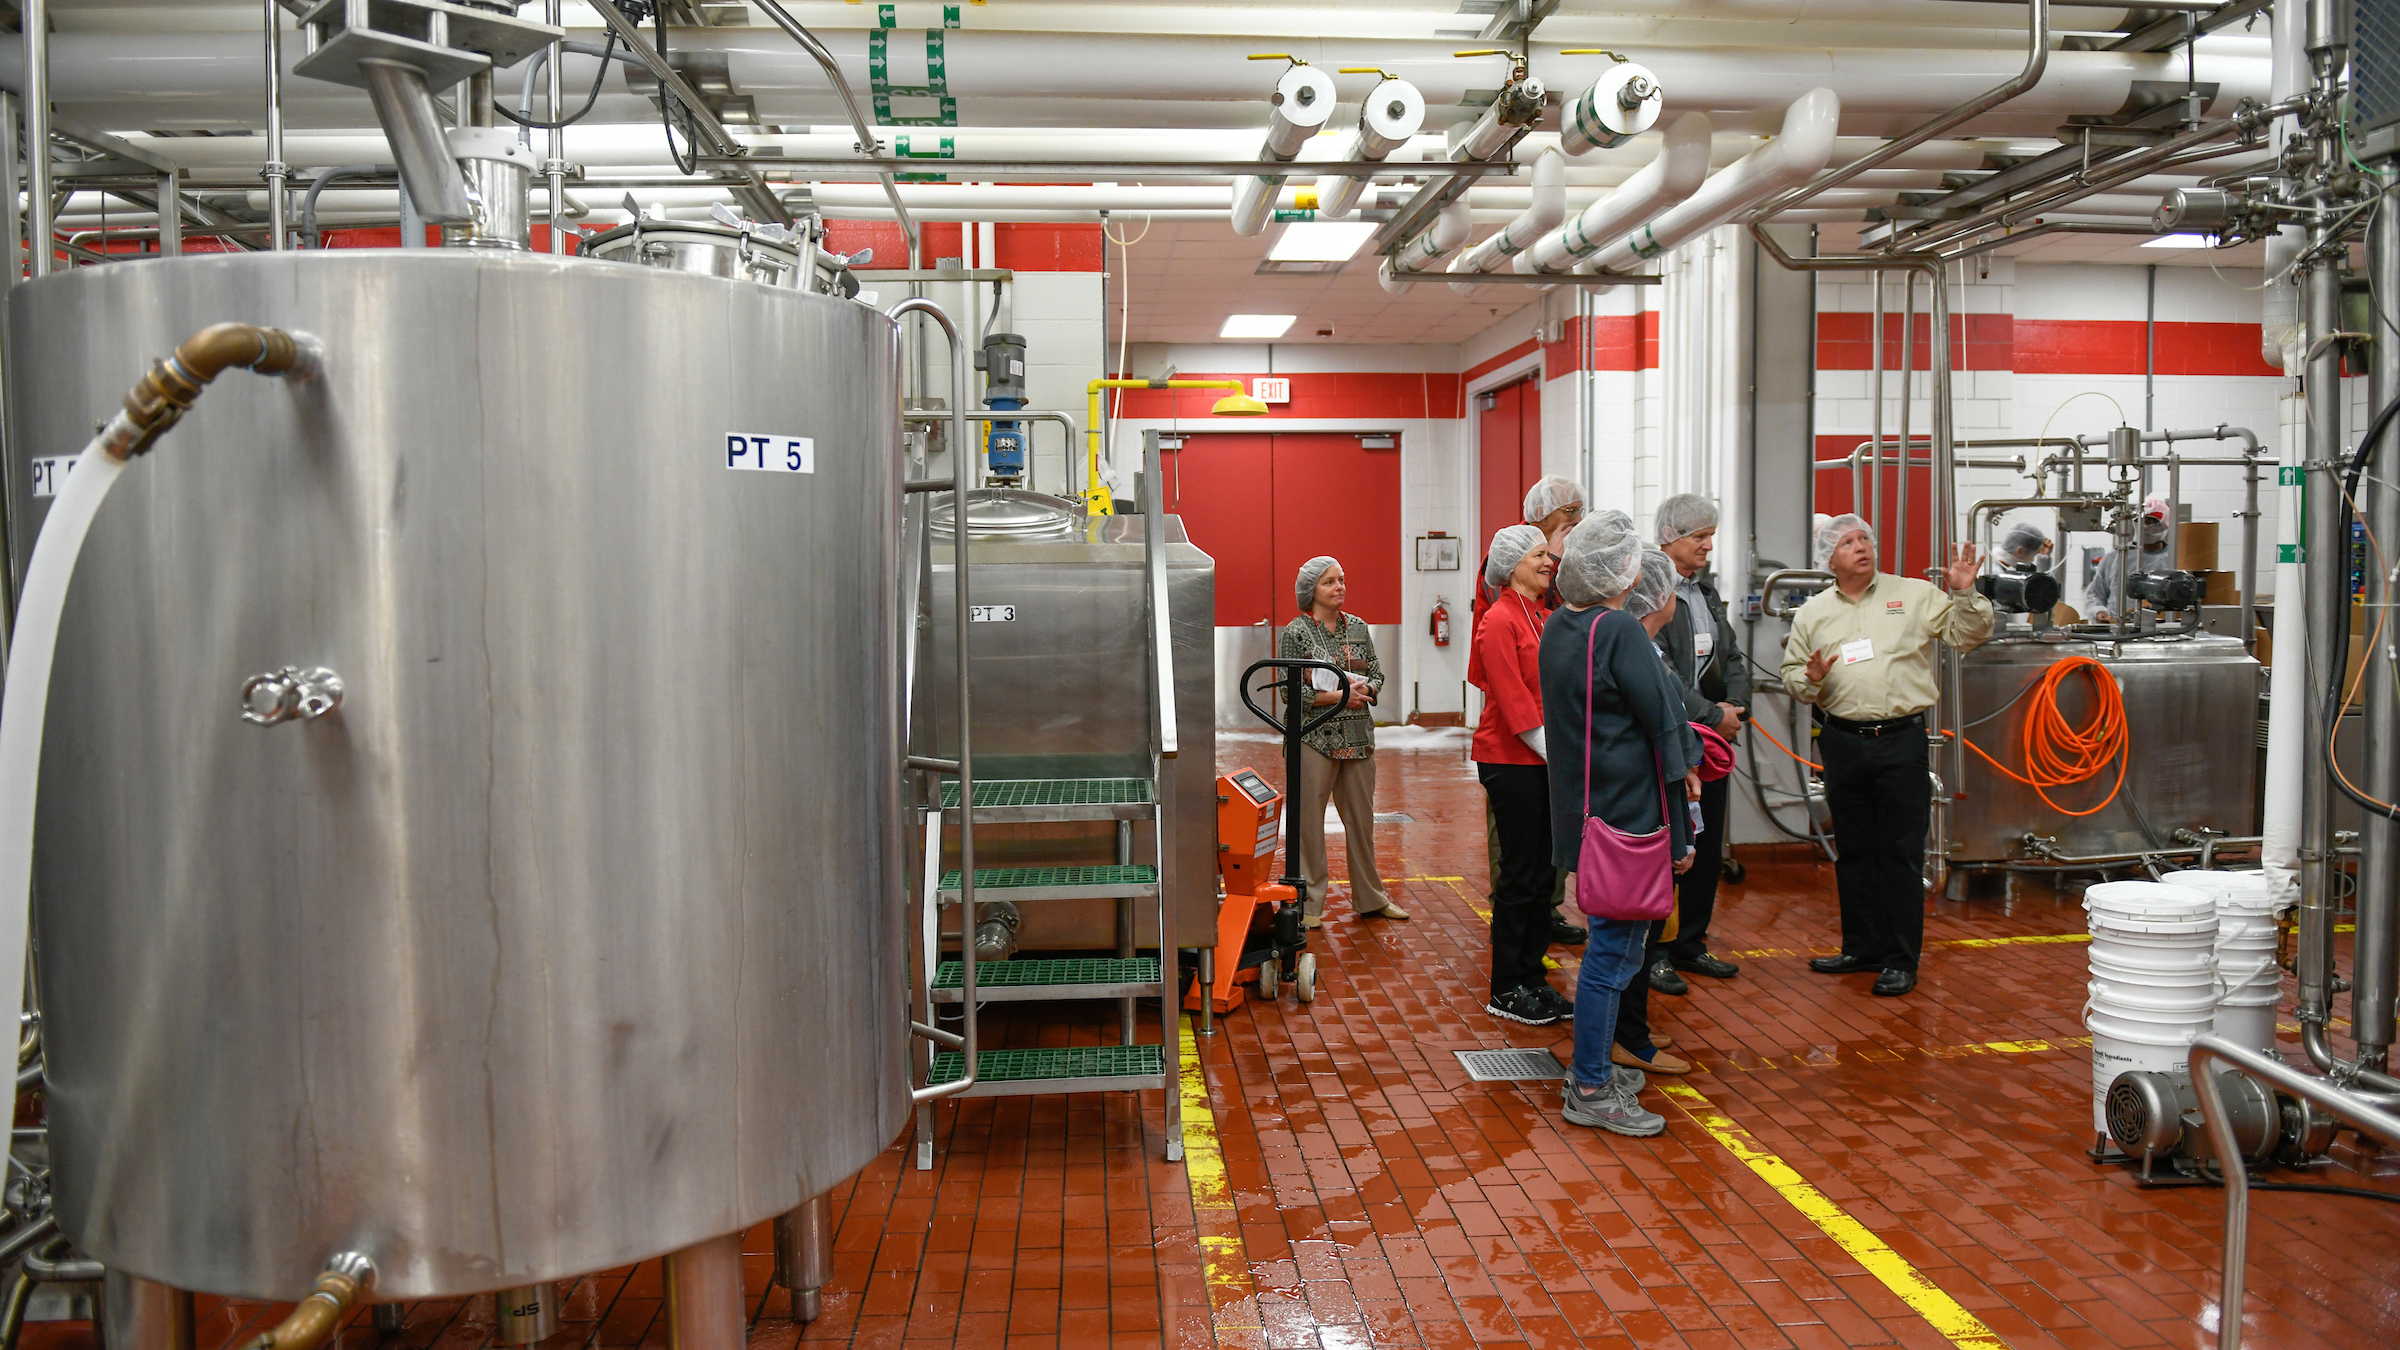 Group of people wearing hair nets tour a dairy production facility.